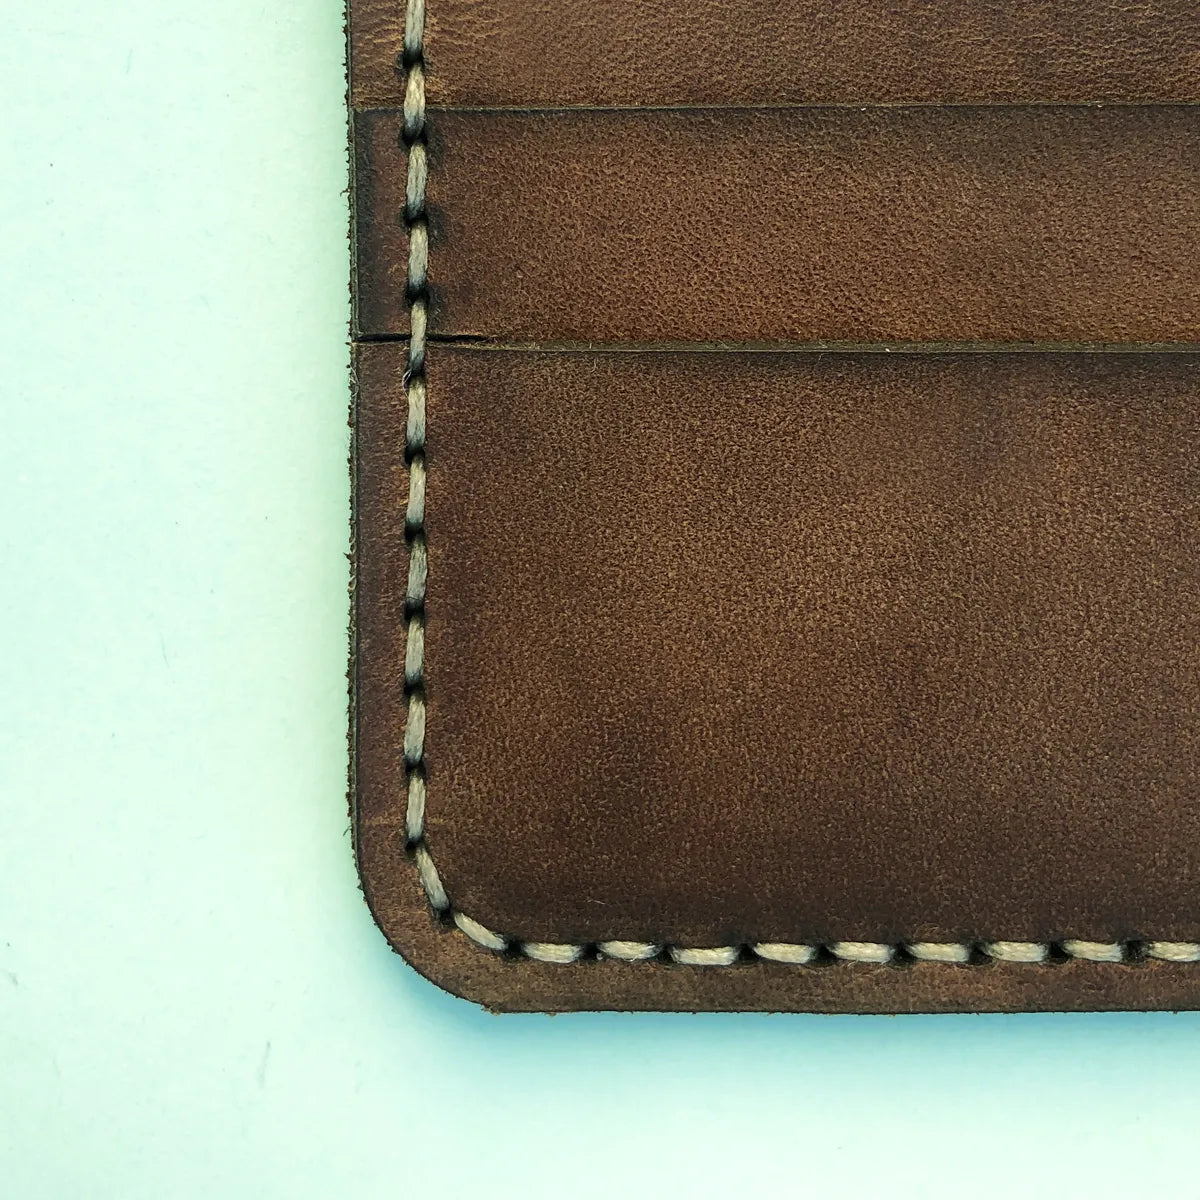 The Artisan: A Leather Cardholder Wallet - Brown Color